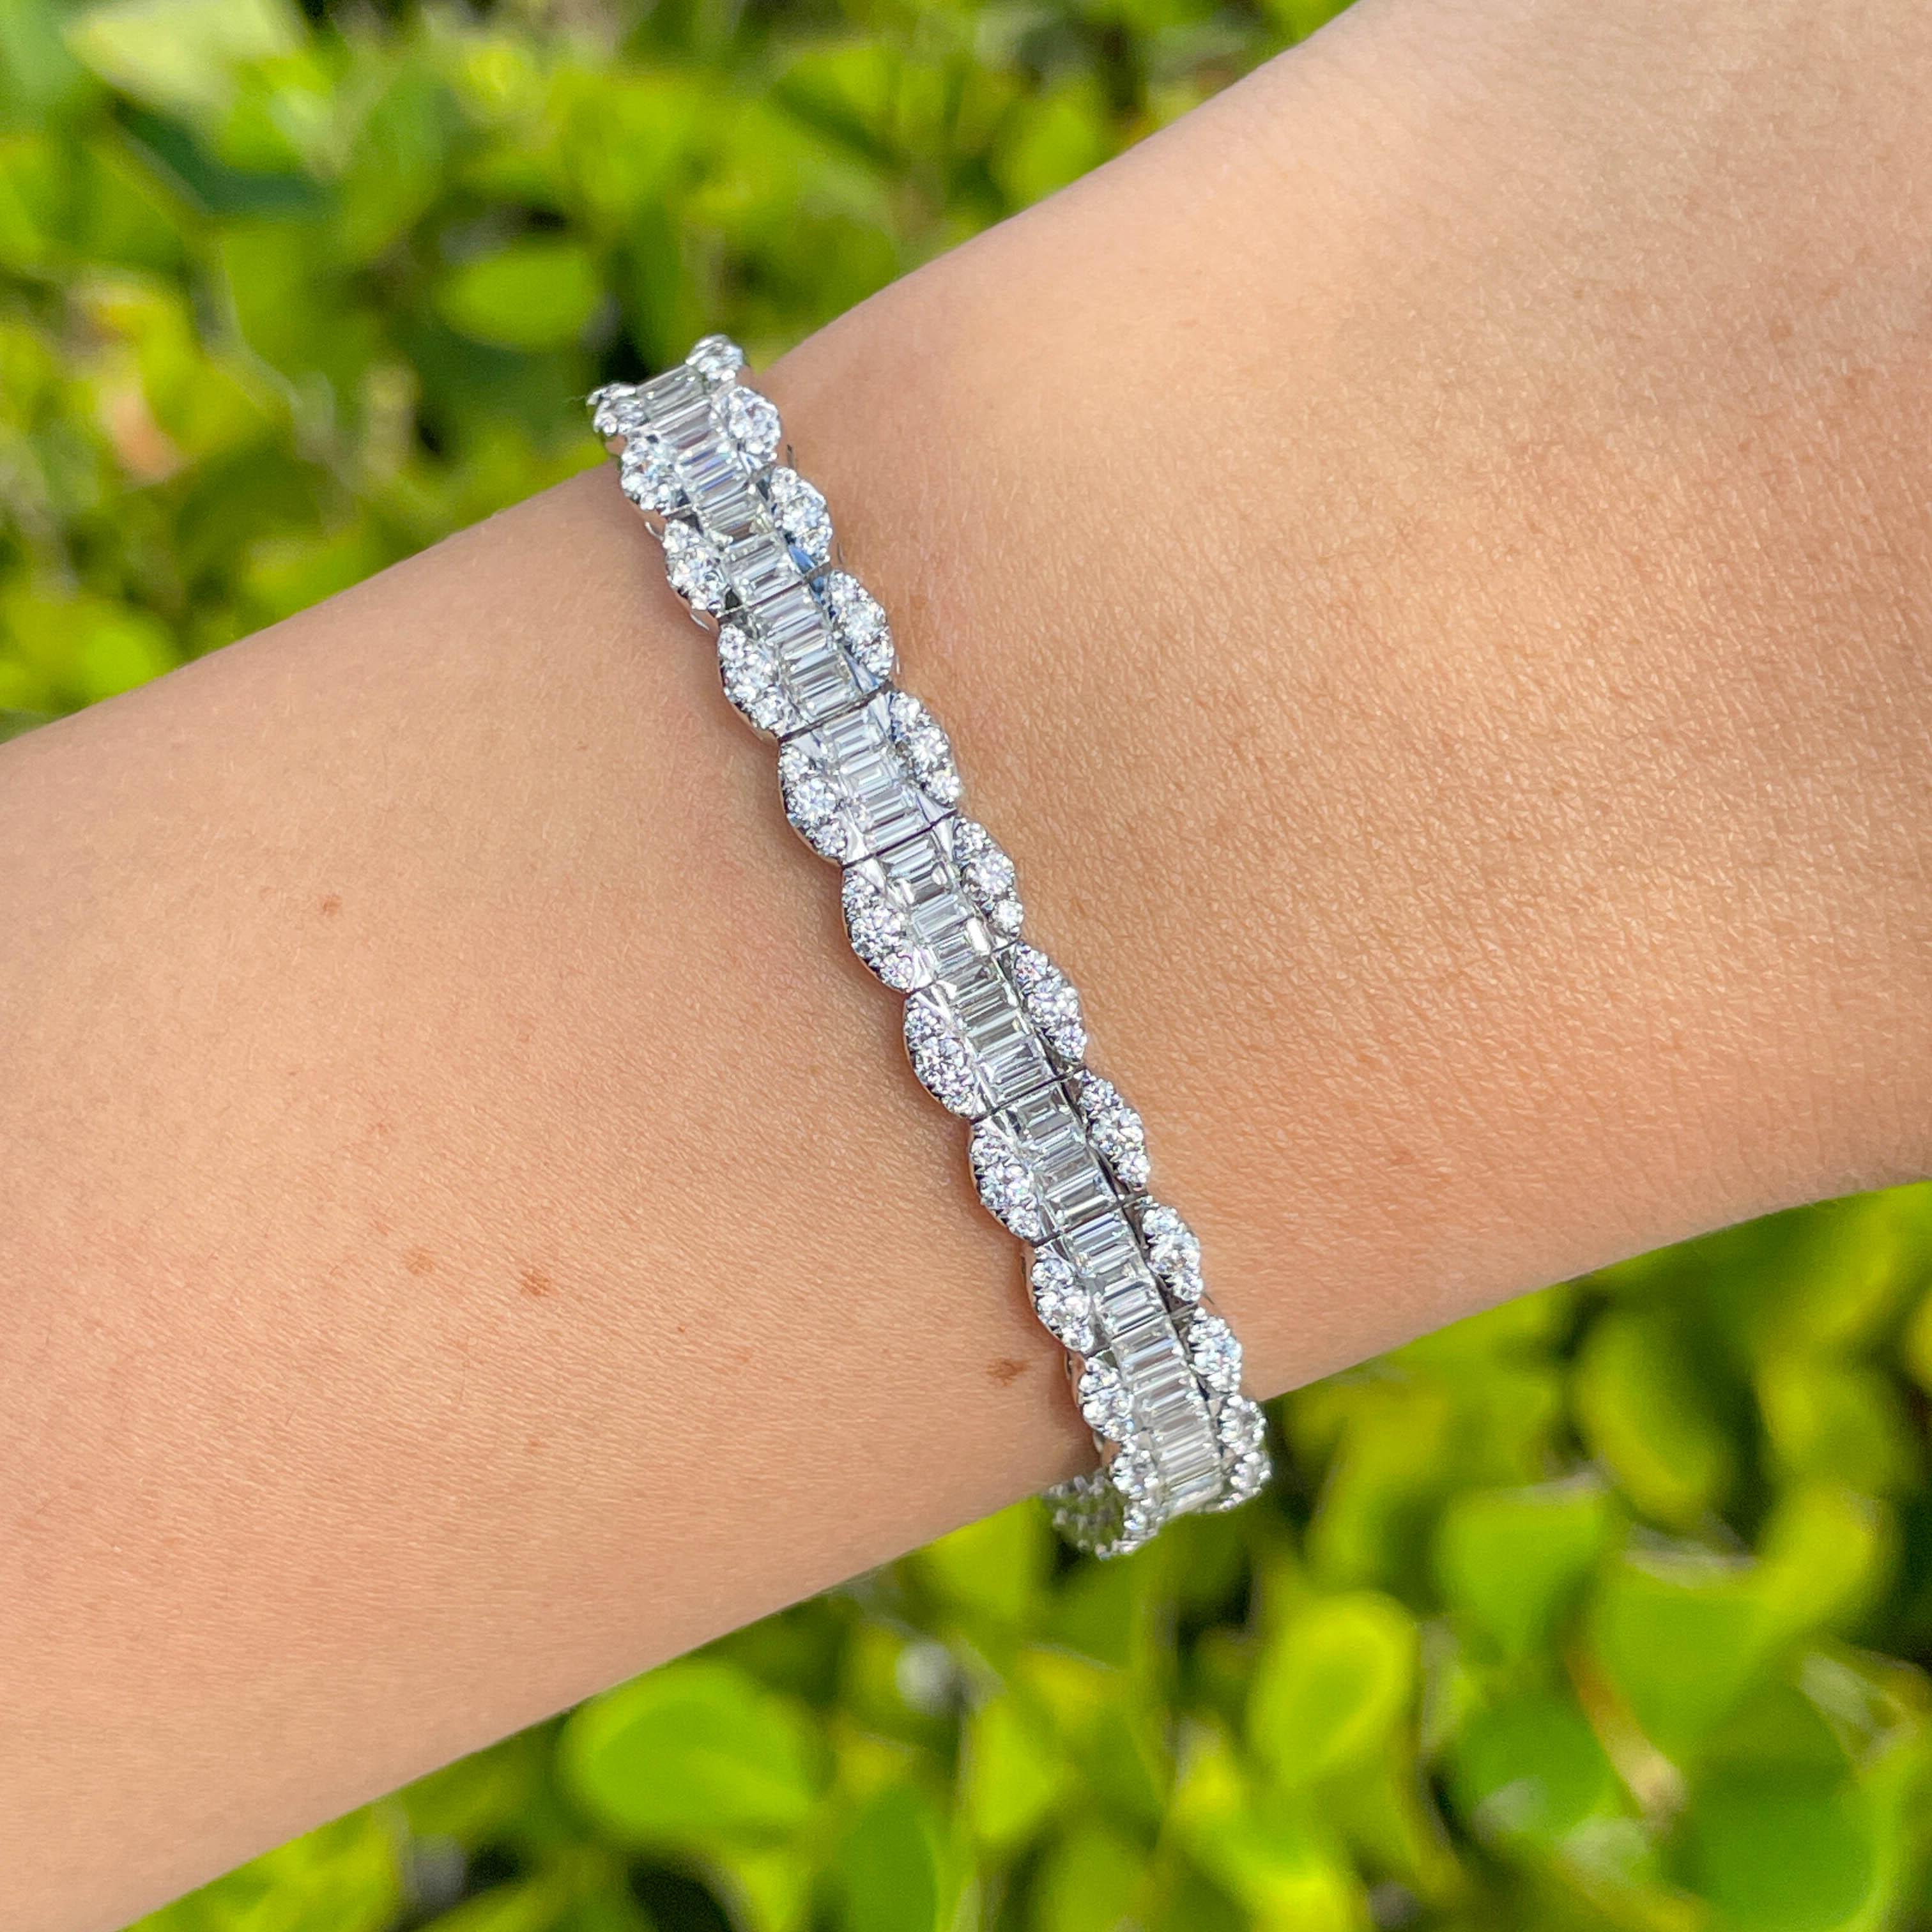 Jay Feder 18k White Gold Diamond Oval Cluster Tennis Bracelet

Set with 190 round and 149 baguette diamonds; total carat weight is 6.91ctw.

The bracelet is 7 inches long and 7.43mm wide. Total weight is 21.8 grams.

Please view our photos and